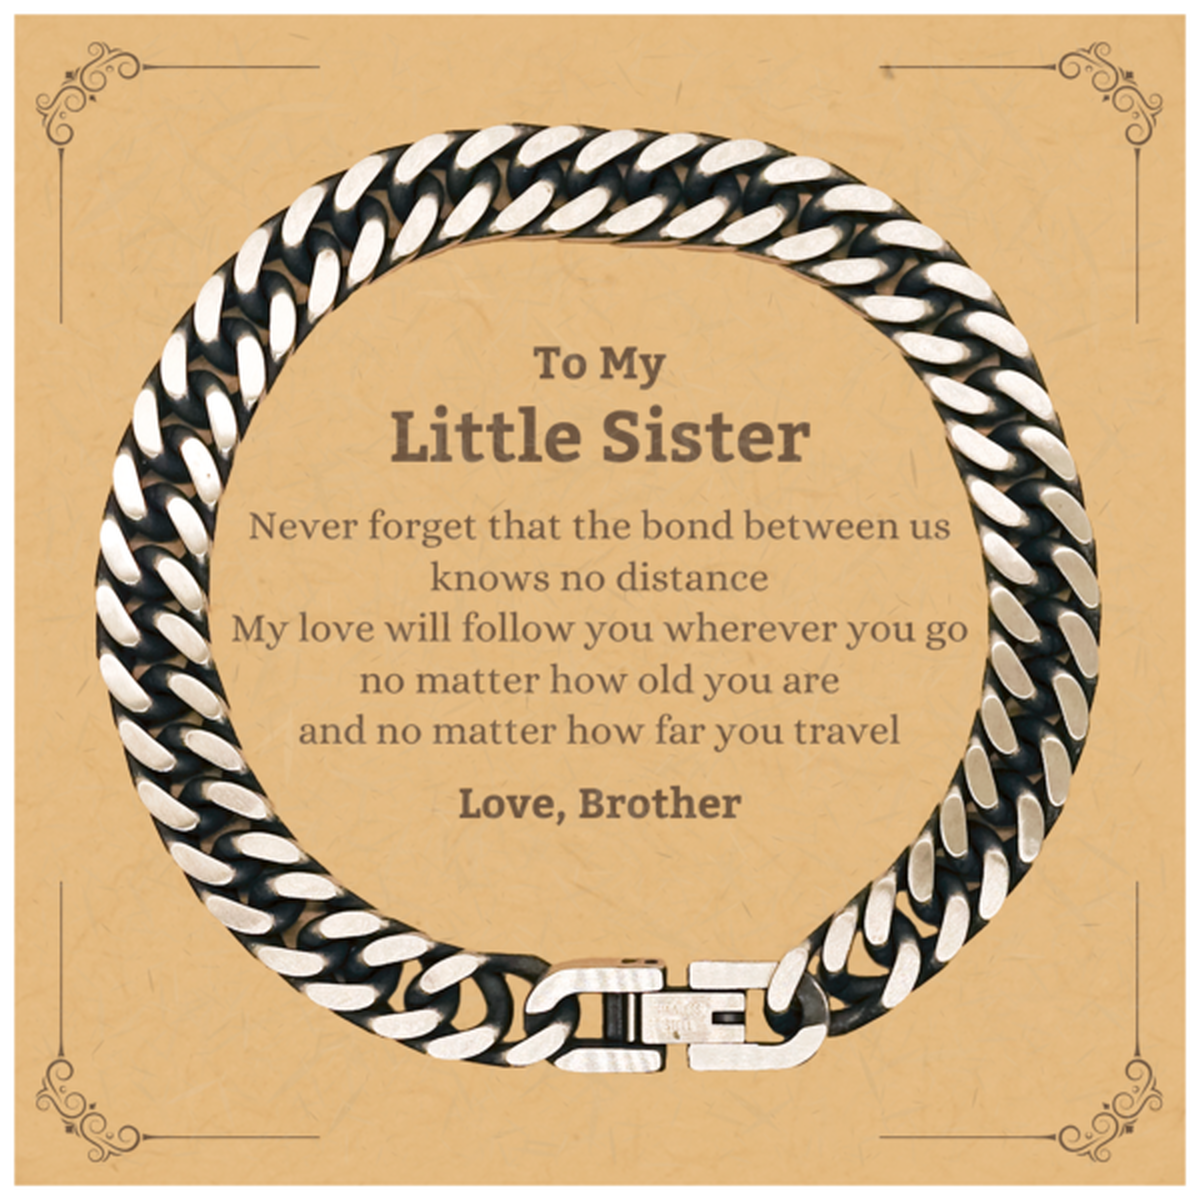 Little Sister Birthday Gifts from Brother, Adjustable Cuban Link Chain Bracelet for Little Sister Christmas Graduation Unique Gifts Little Sister Never forget that the bond between us knows no distance. Love, Brother